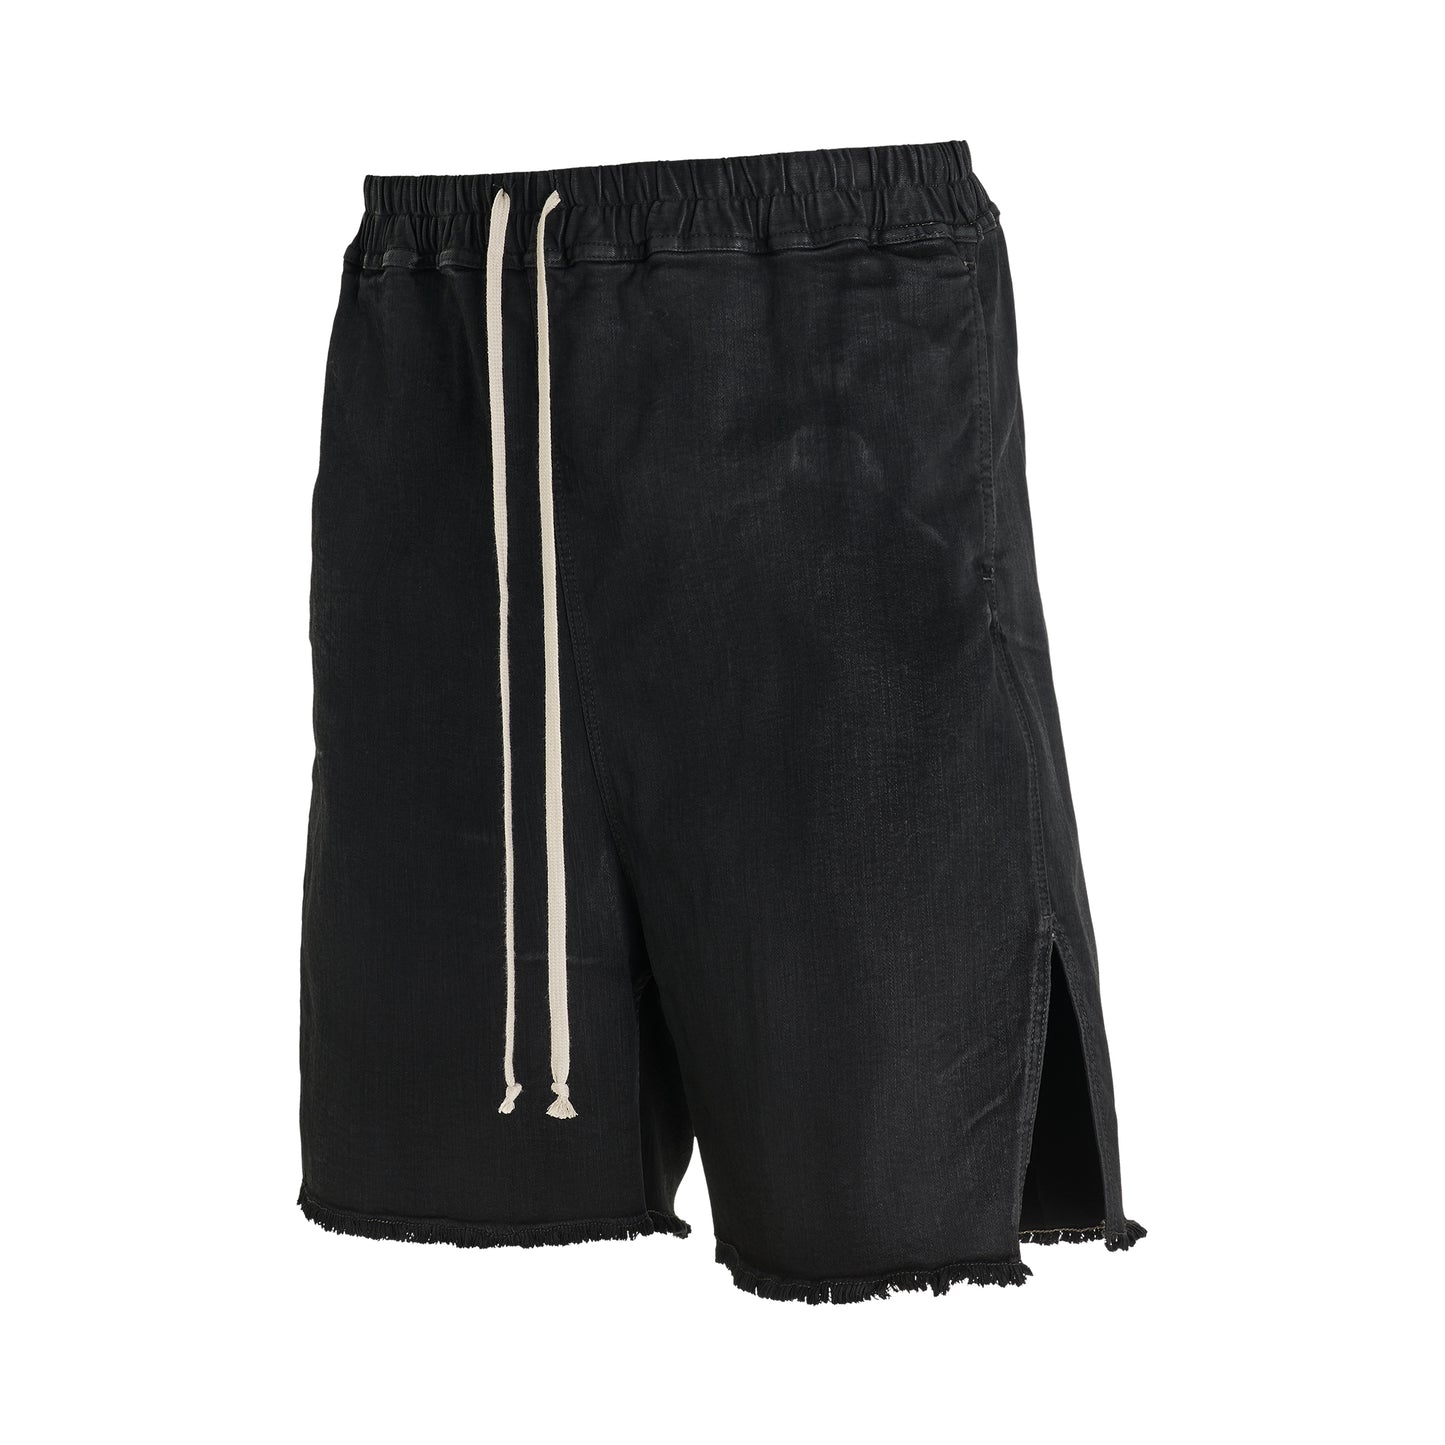 Long Boxers Shorts in Black Wax